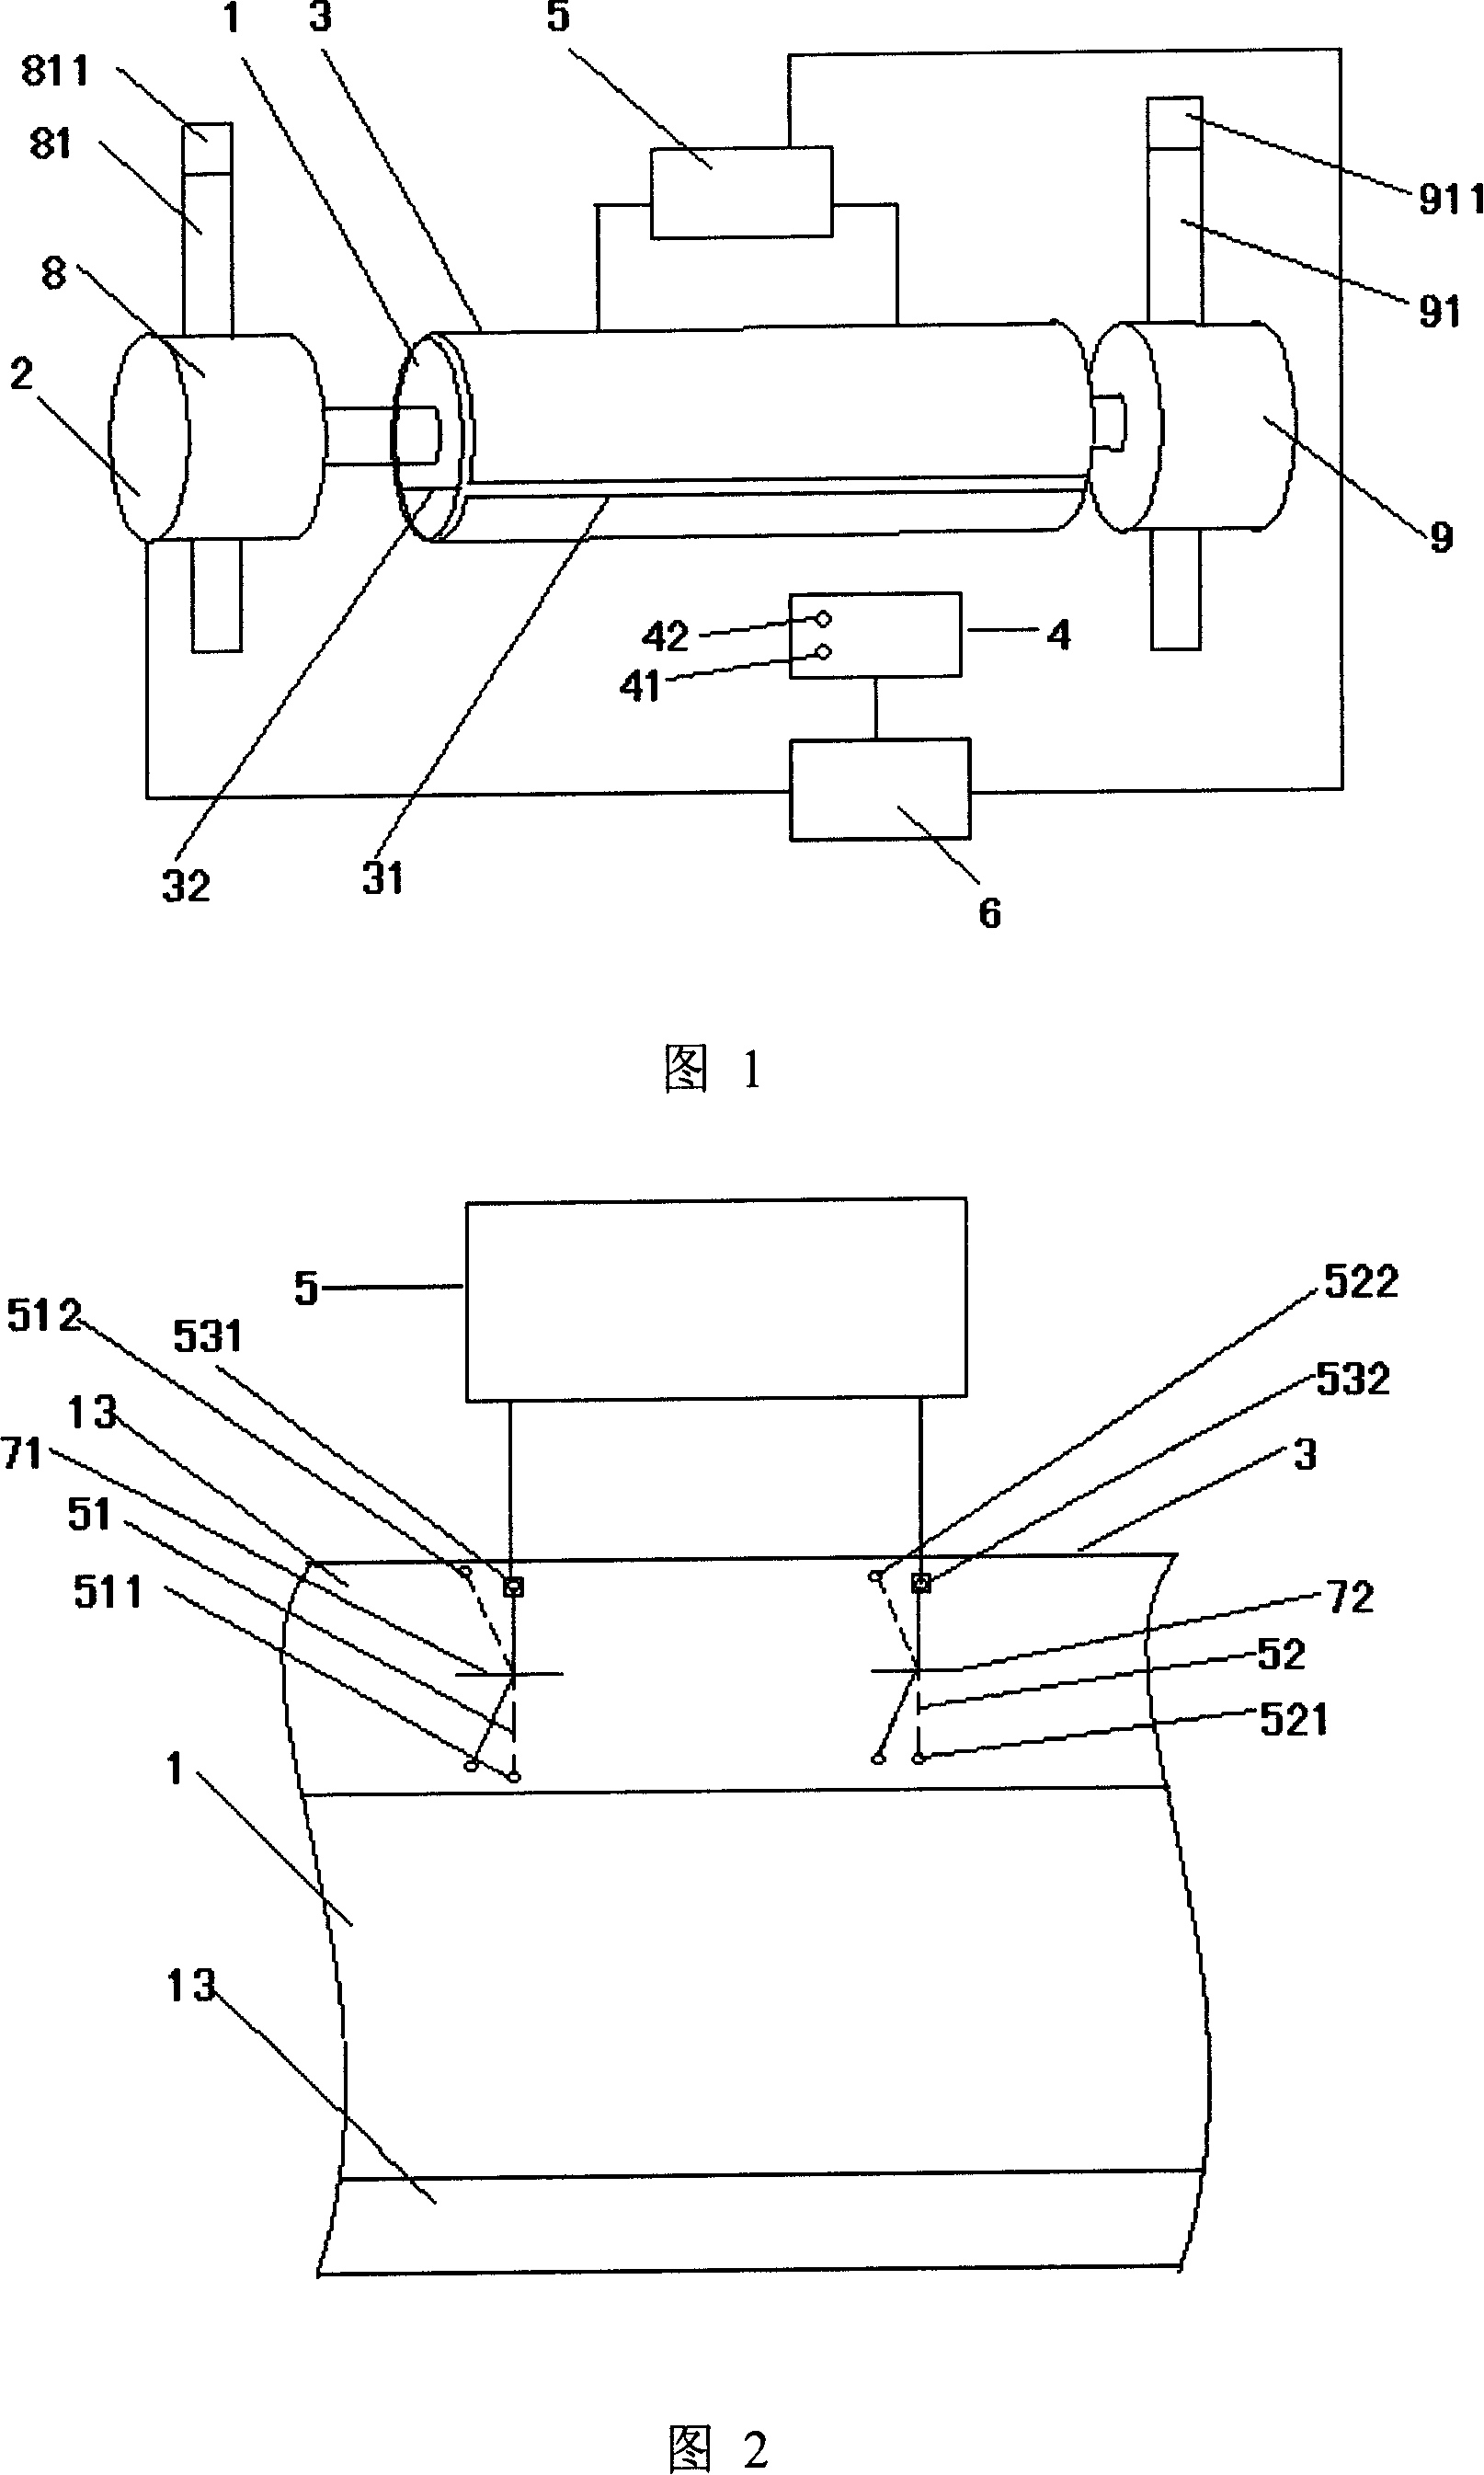 Paper reeling instrument structure and computer display with the same